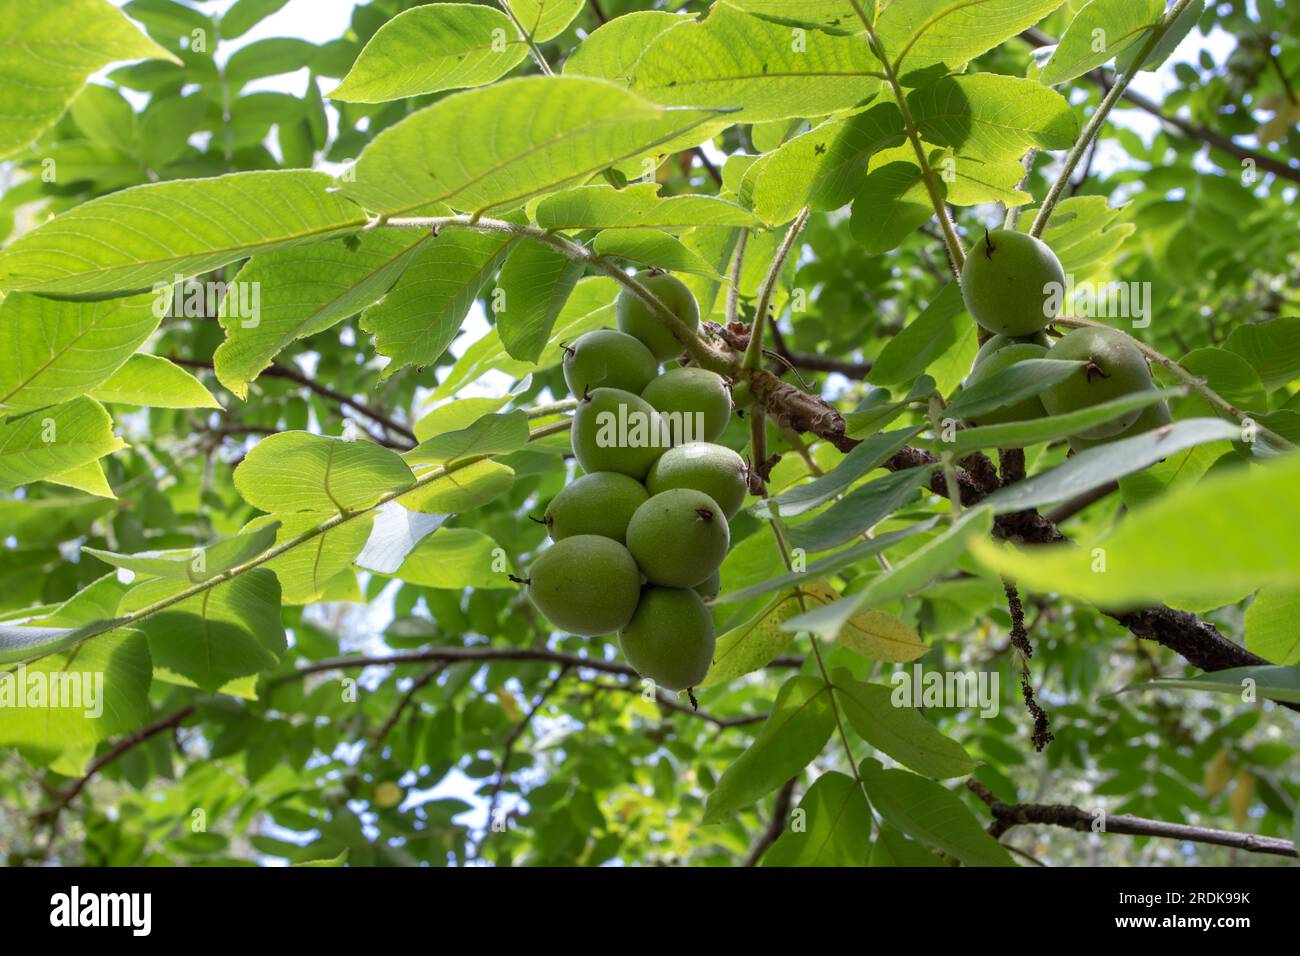 Juglans mandshurica or monkey nuts or manchurian walnut plant. Fruits with green husk in the spike. Stock Photo